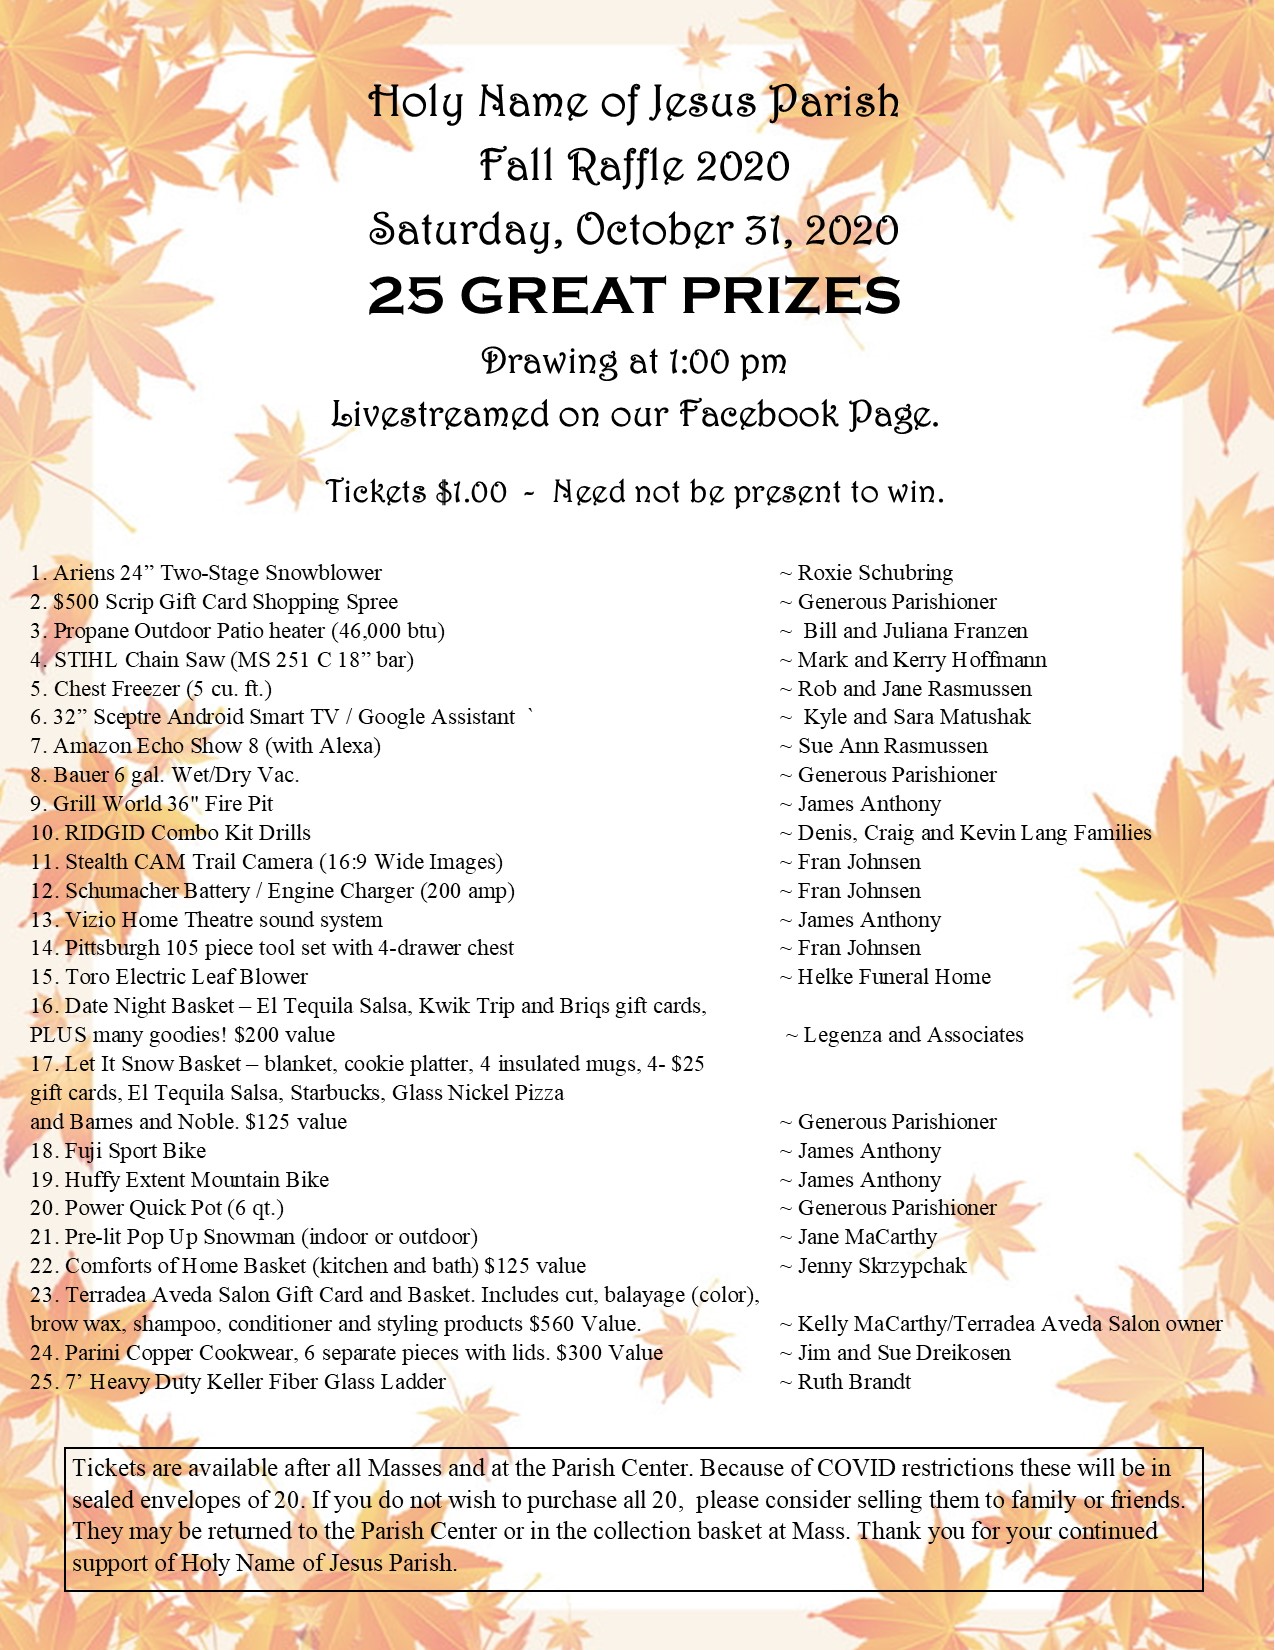 Fall Raffle Tickets Going Fast! – Holy Name of Jesus Parish